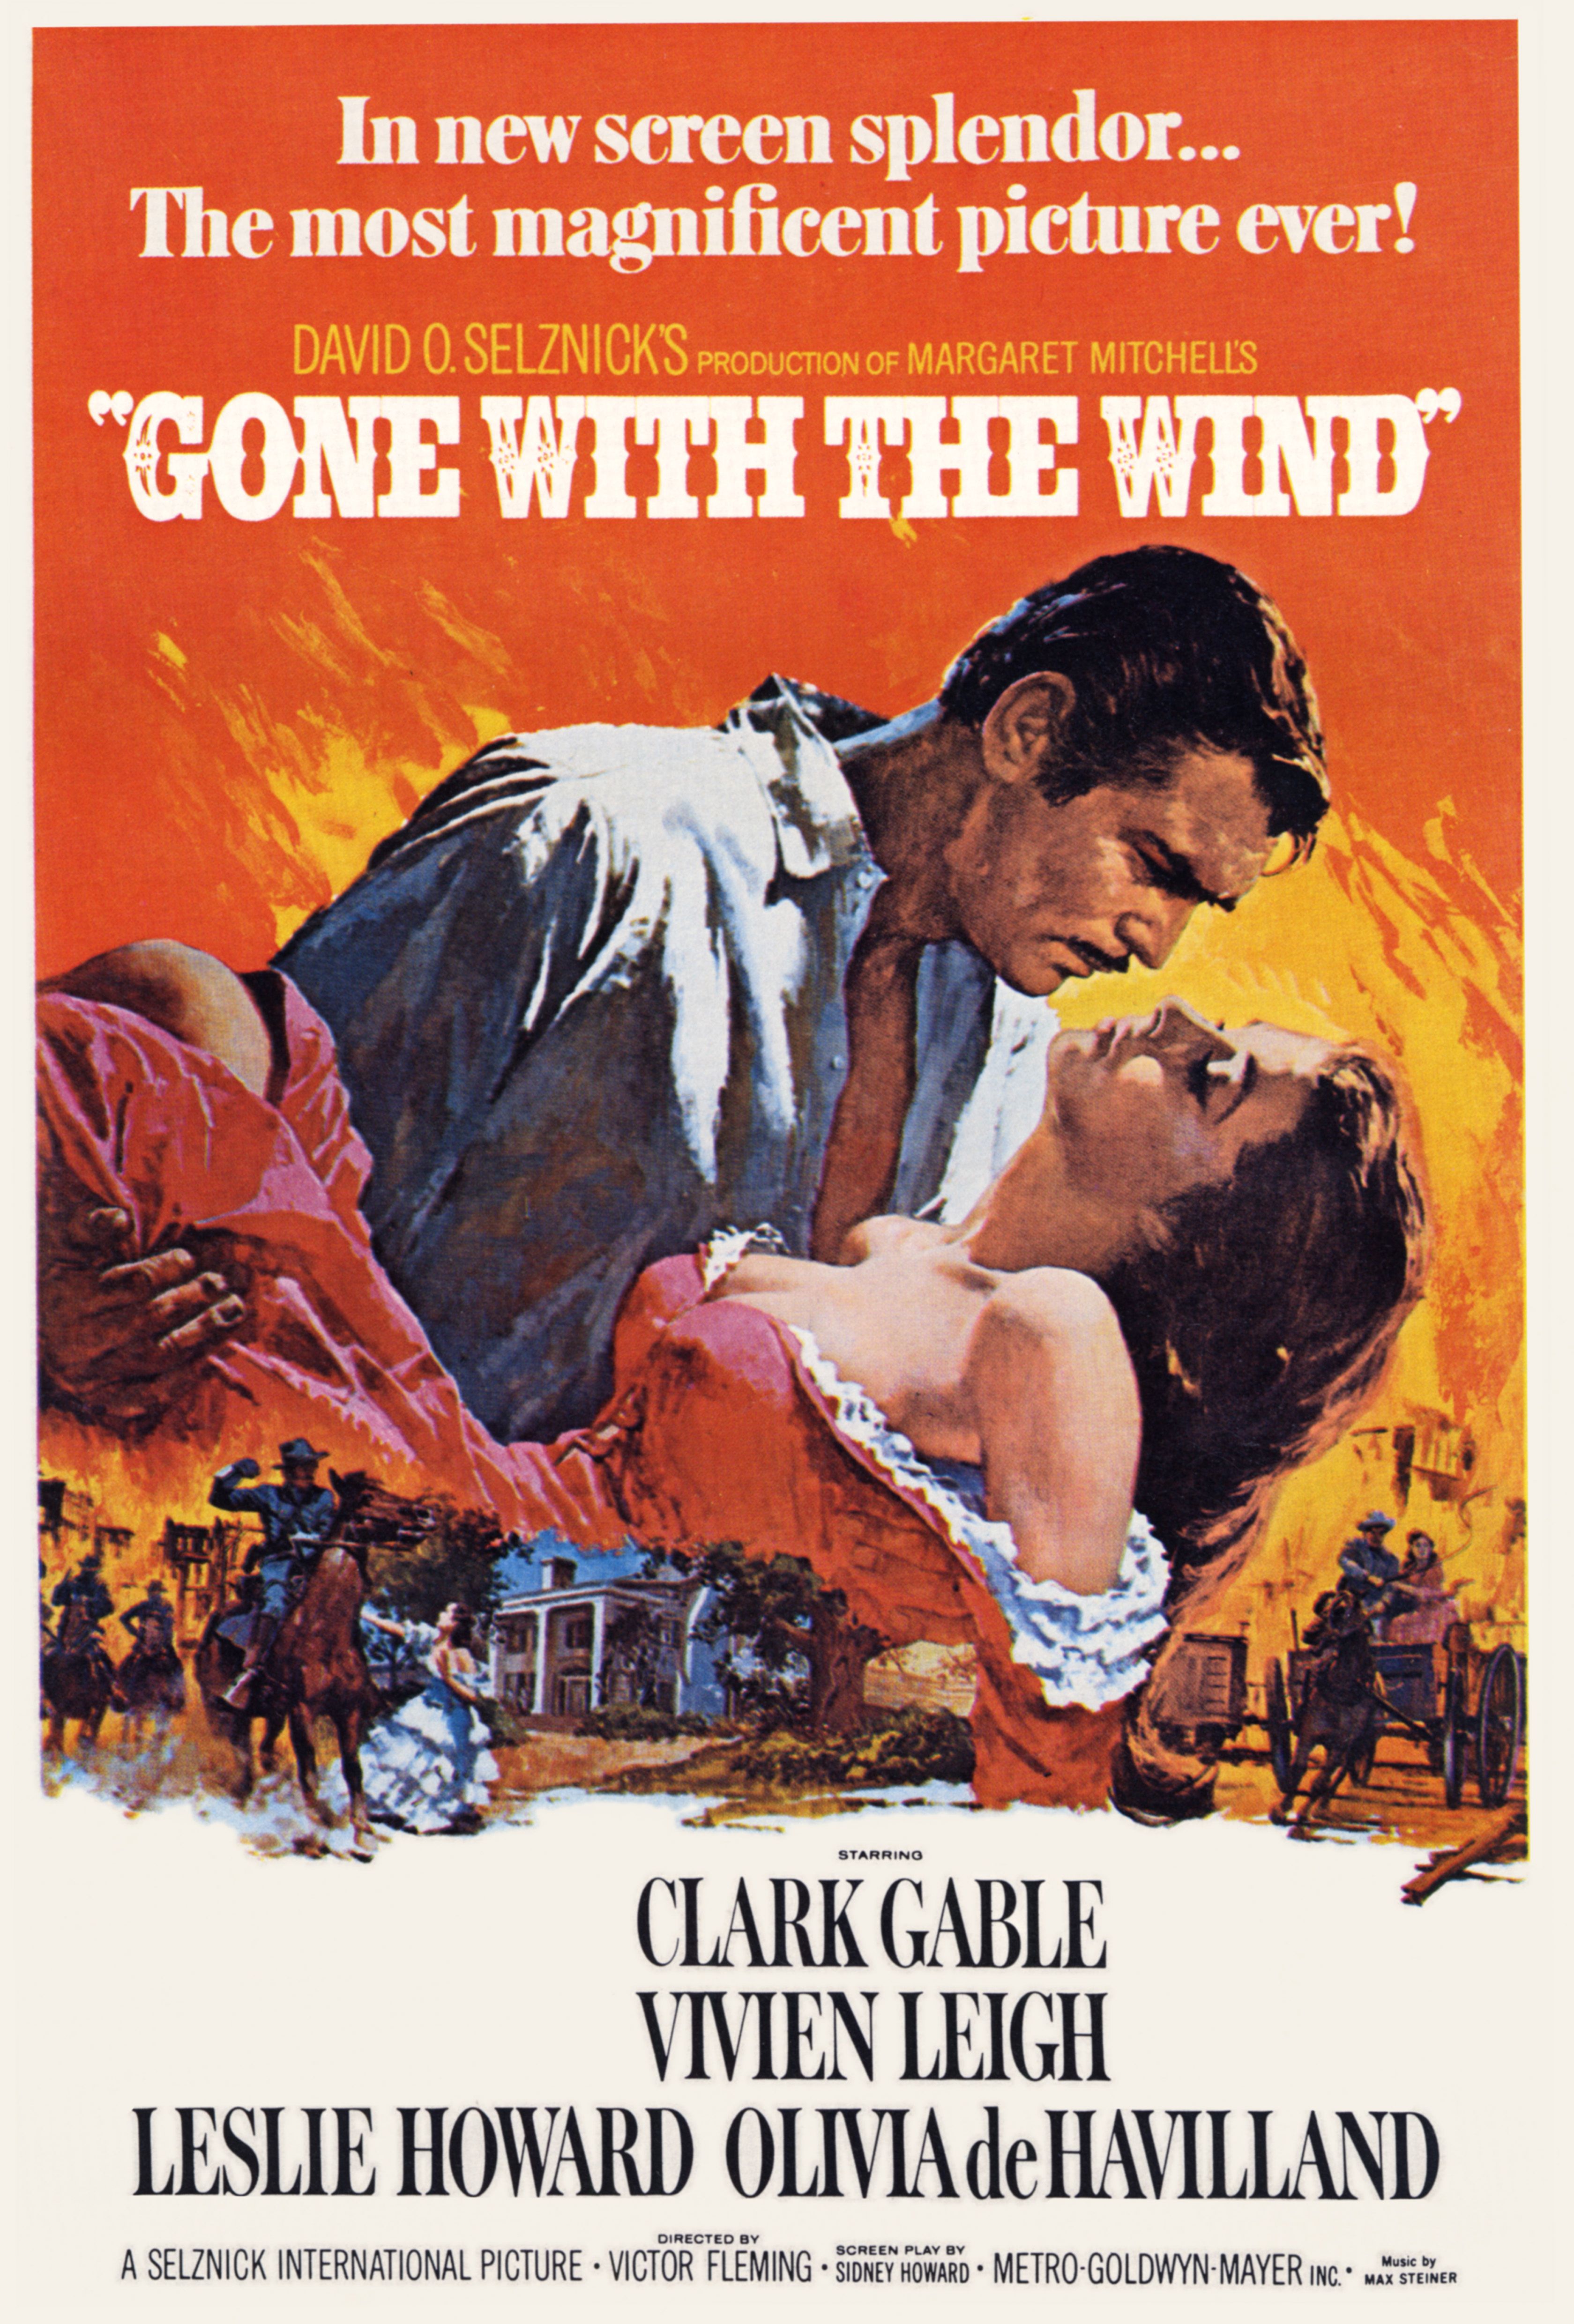 Movie poster for "Gone WIth the WInd" | Source: Getty Images